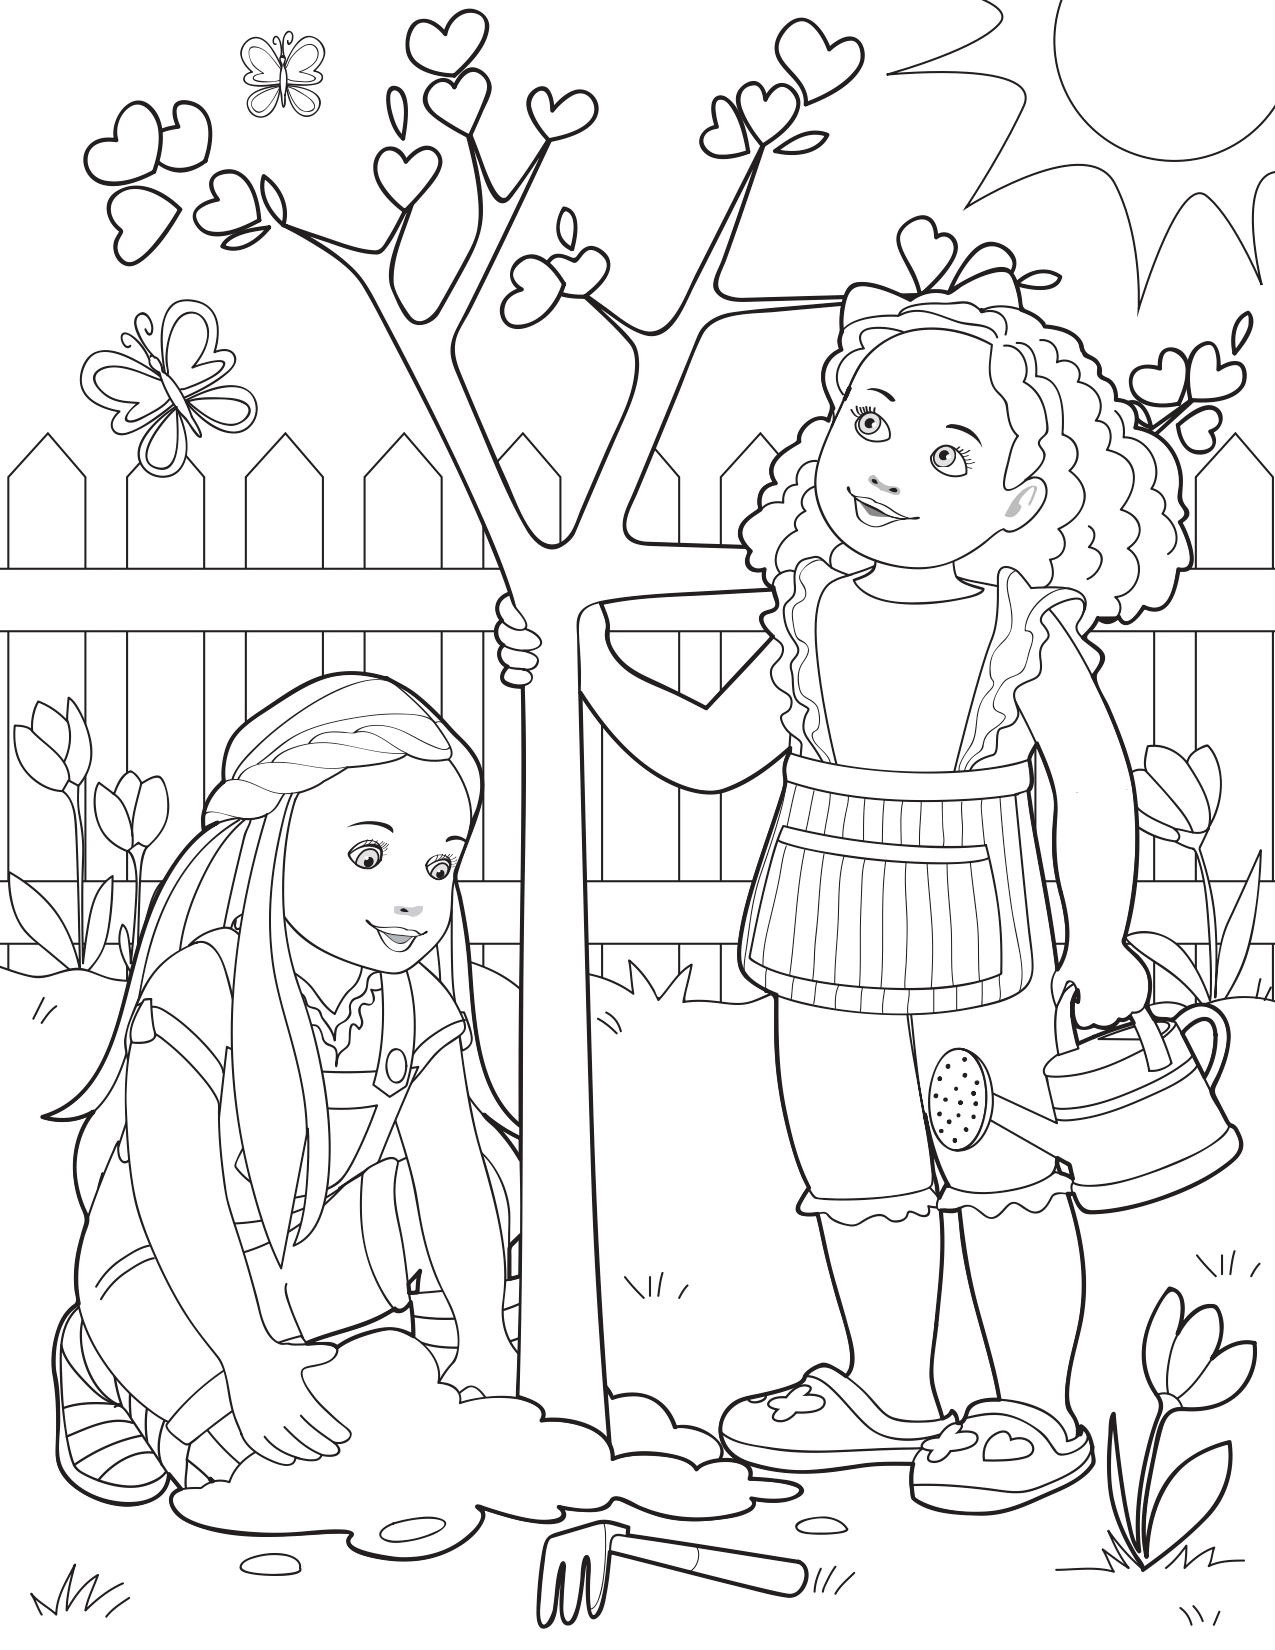 ag doll coloring pages